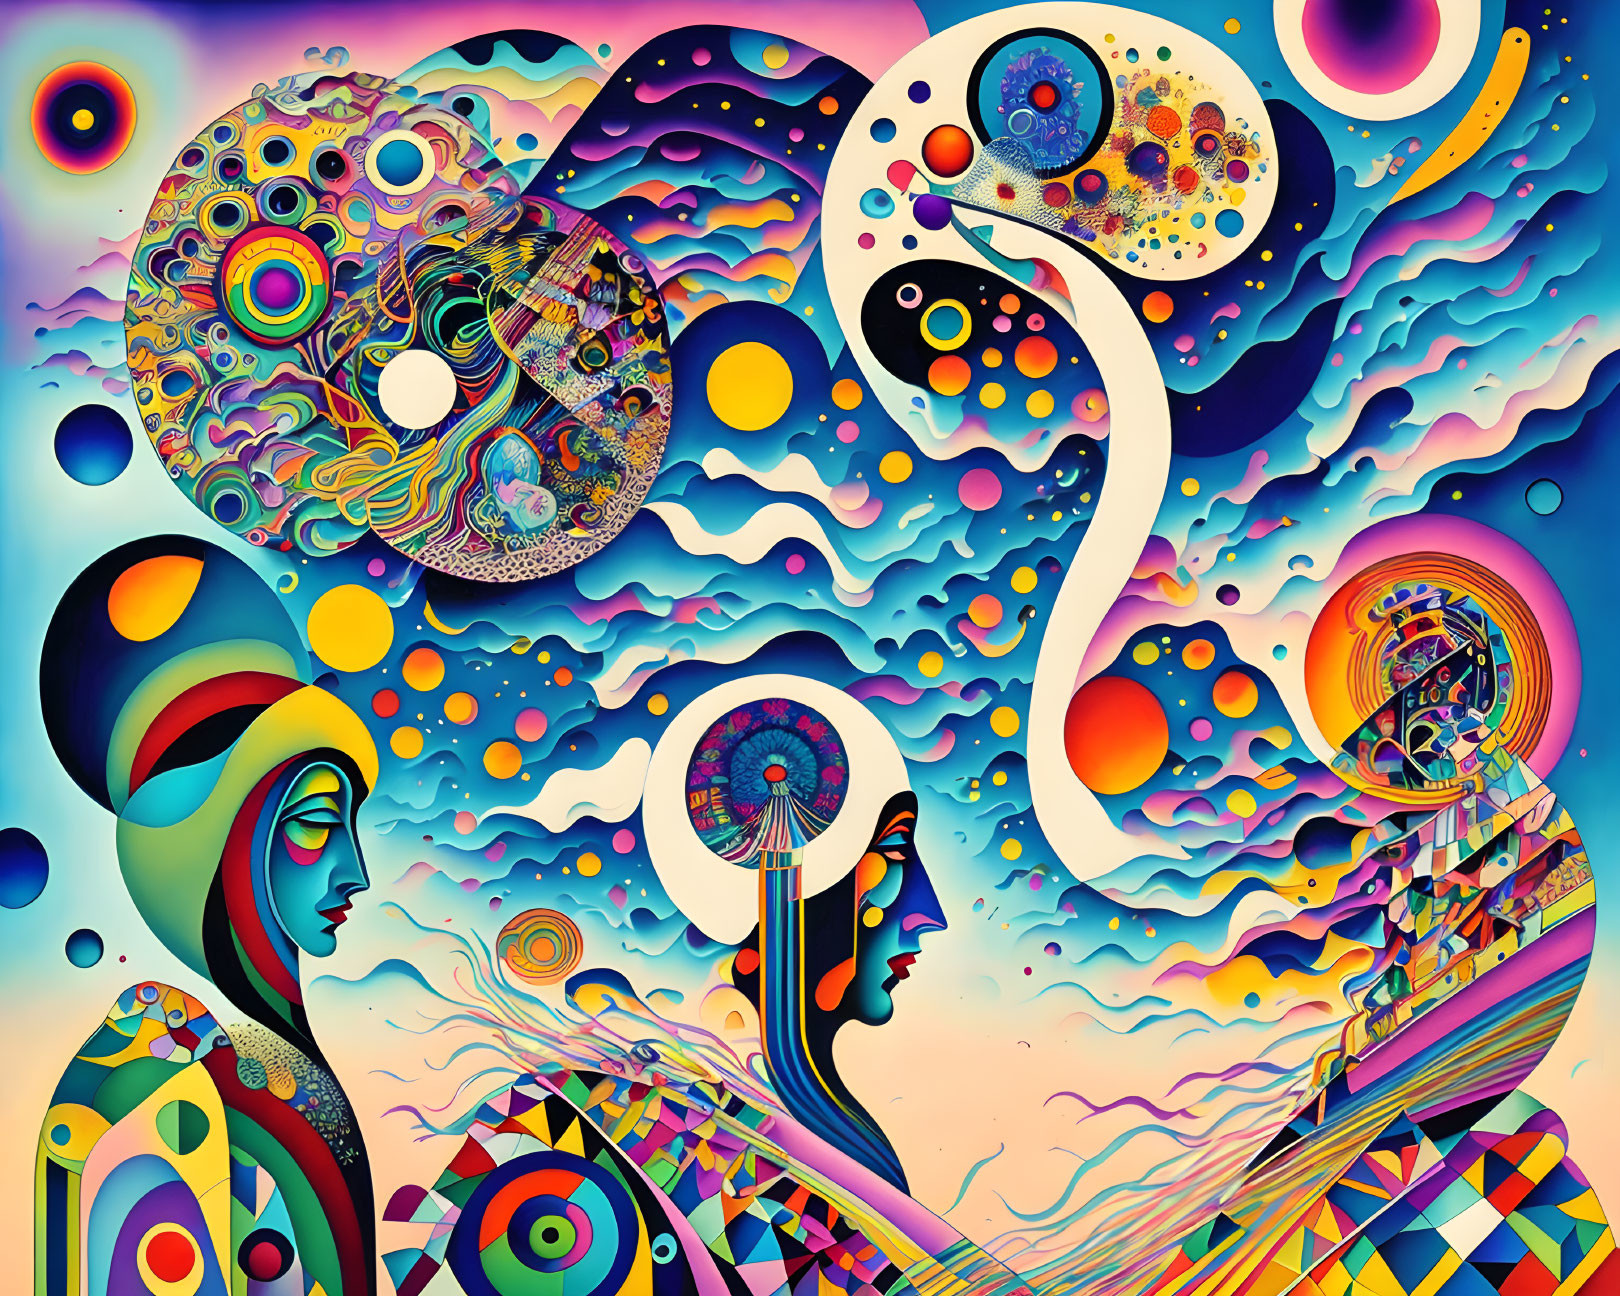 Colorful Psychedelic Artwork with Stylized Human Figures and Abstract Shapes